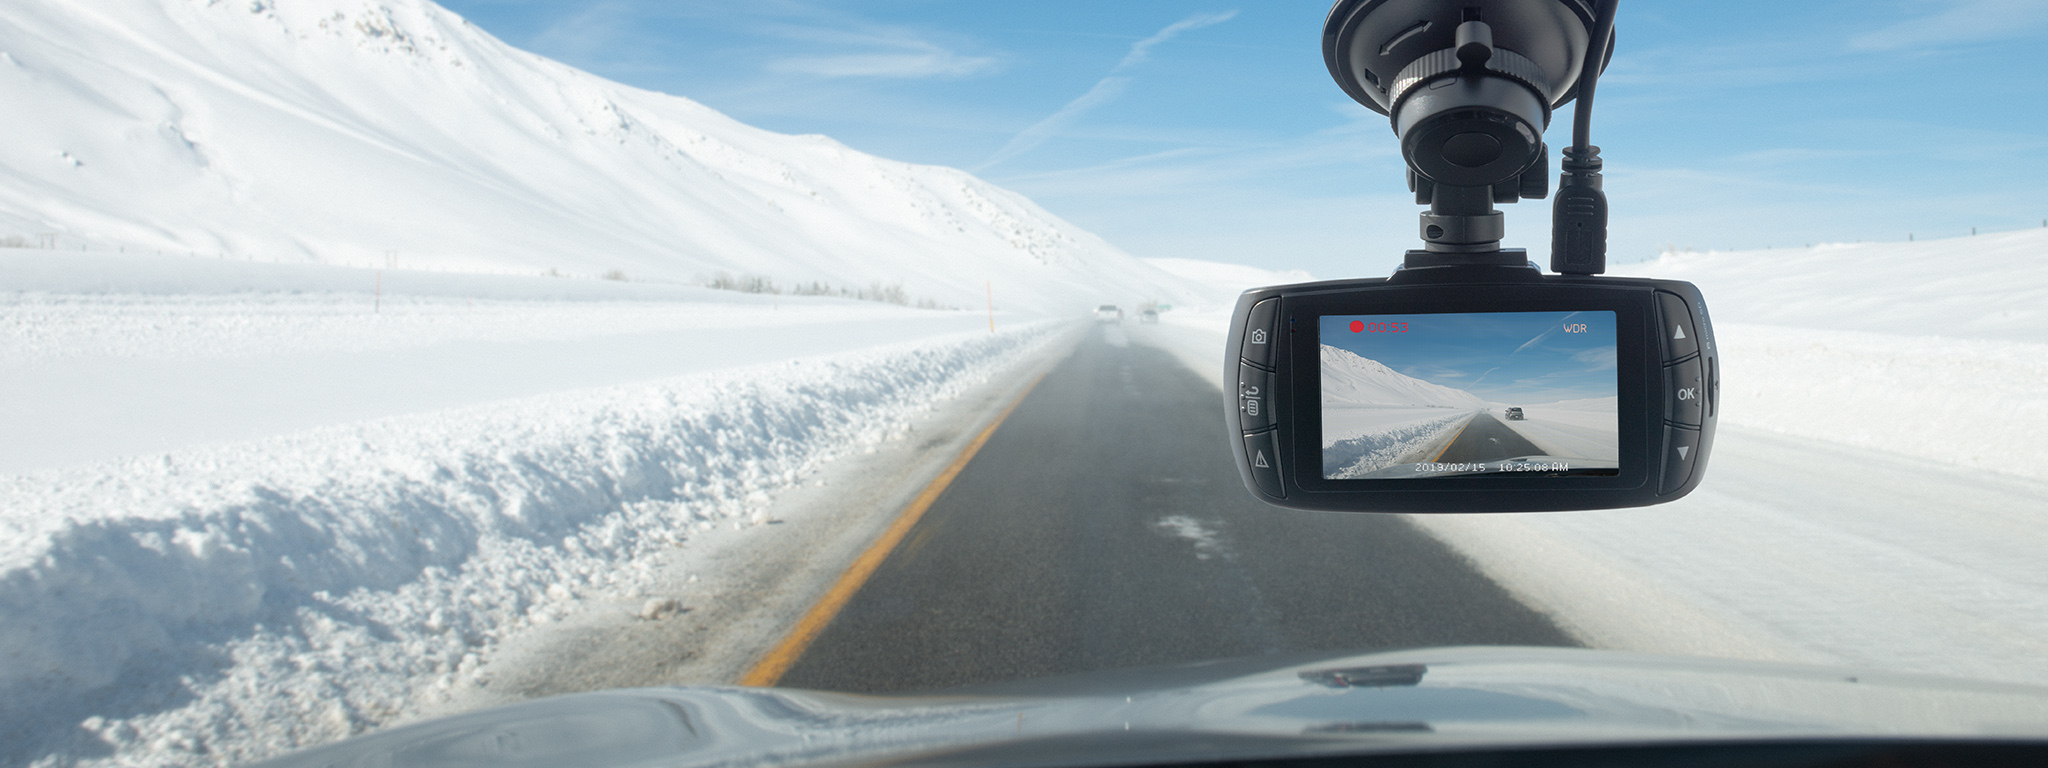 dashcam mounted behind a windshield driving on a clear road with a snow-covered landscape